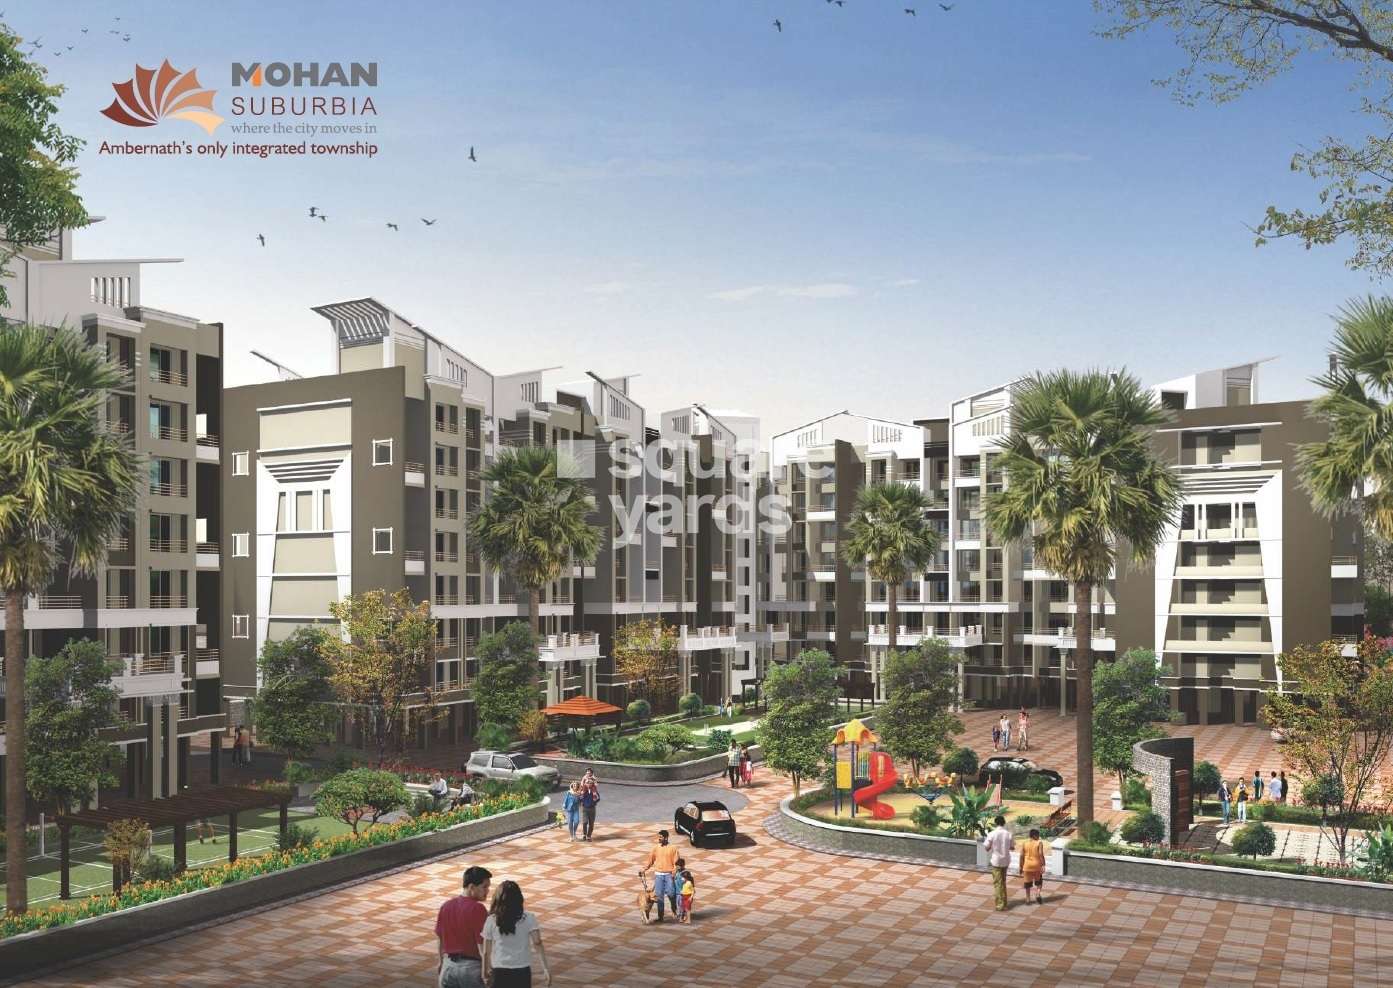 mohan suburbia project tower view9 4628